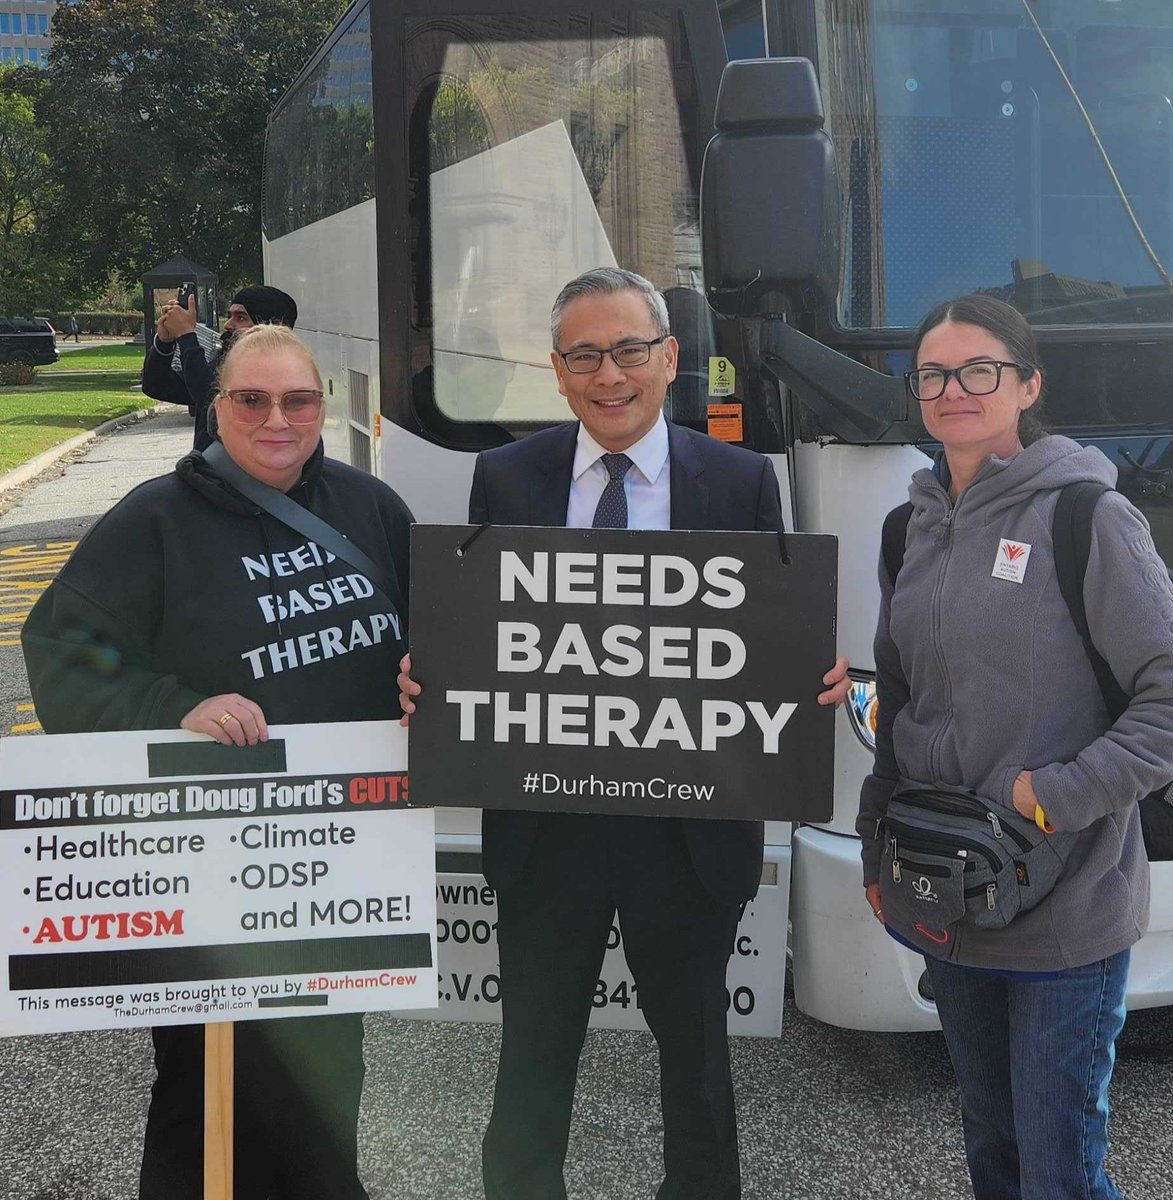 Thank you @aaa_vma and Suzanne for speaking to me about access to #Autism services in #Ontario and sharing the struggles under the Ford government during yesterday's rally. #60KISNotOK